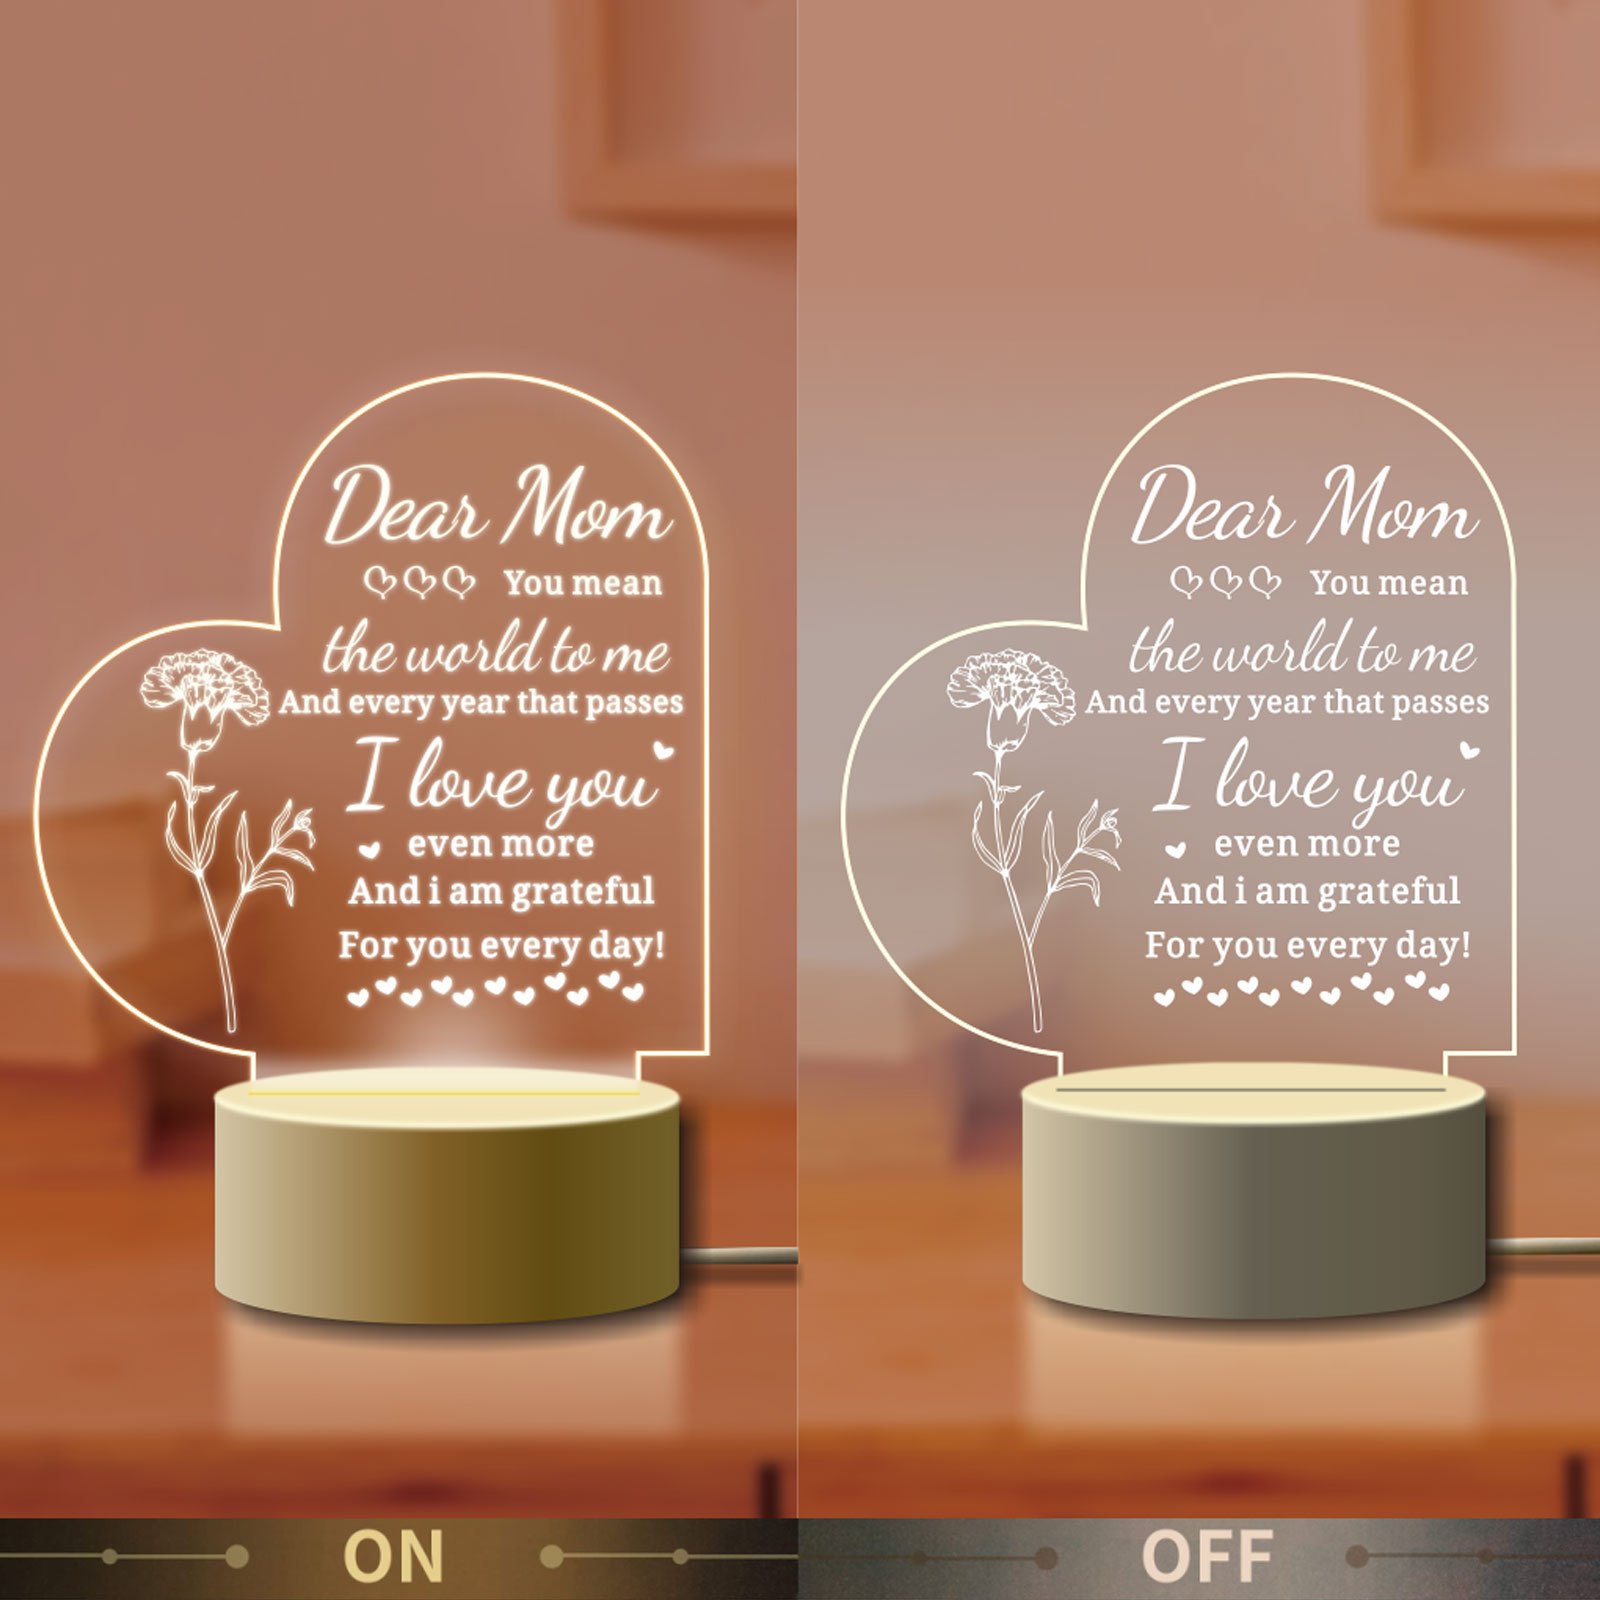 Gifts for Mom from Daughter, Son - Mom Gifts from Daughter, Son for Christmas, Mothers Day - Mom Birthday Gifts, Birthday Gifts for Mom, Wife 